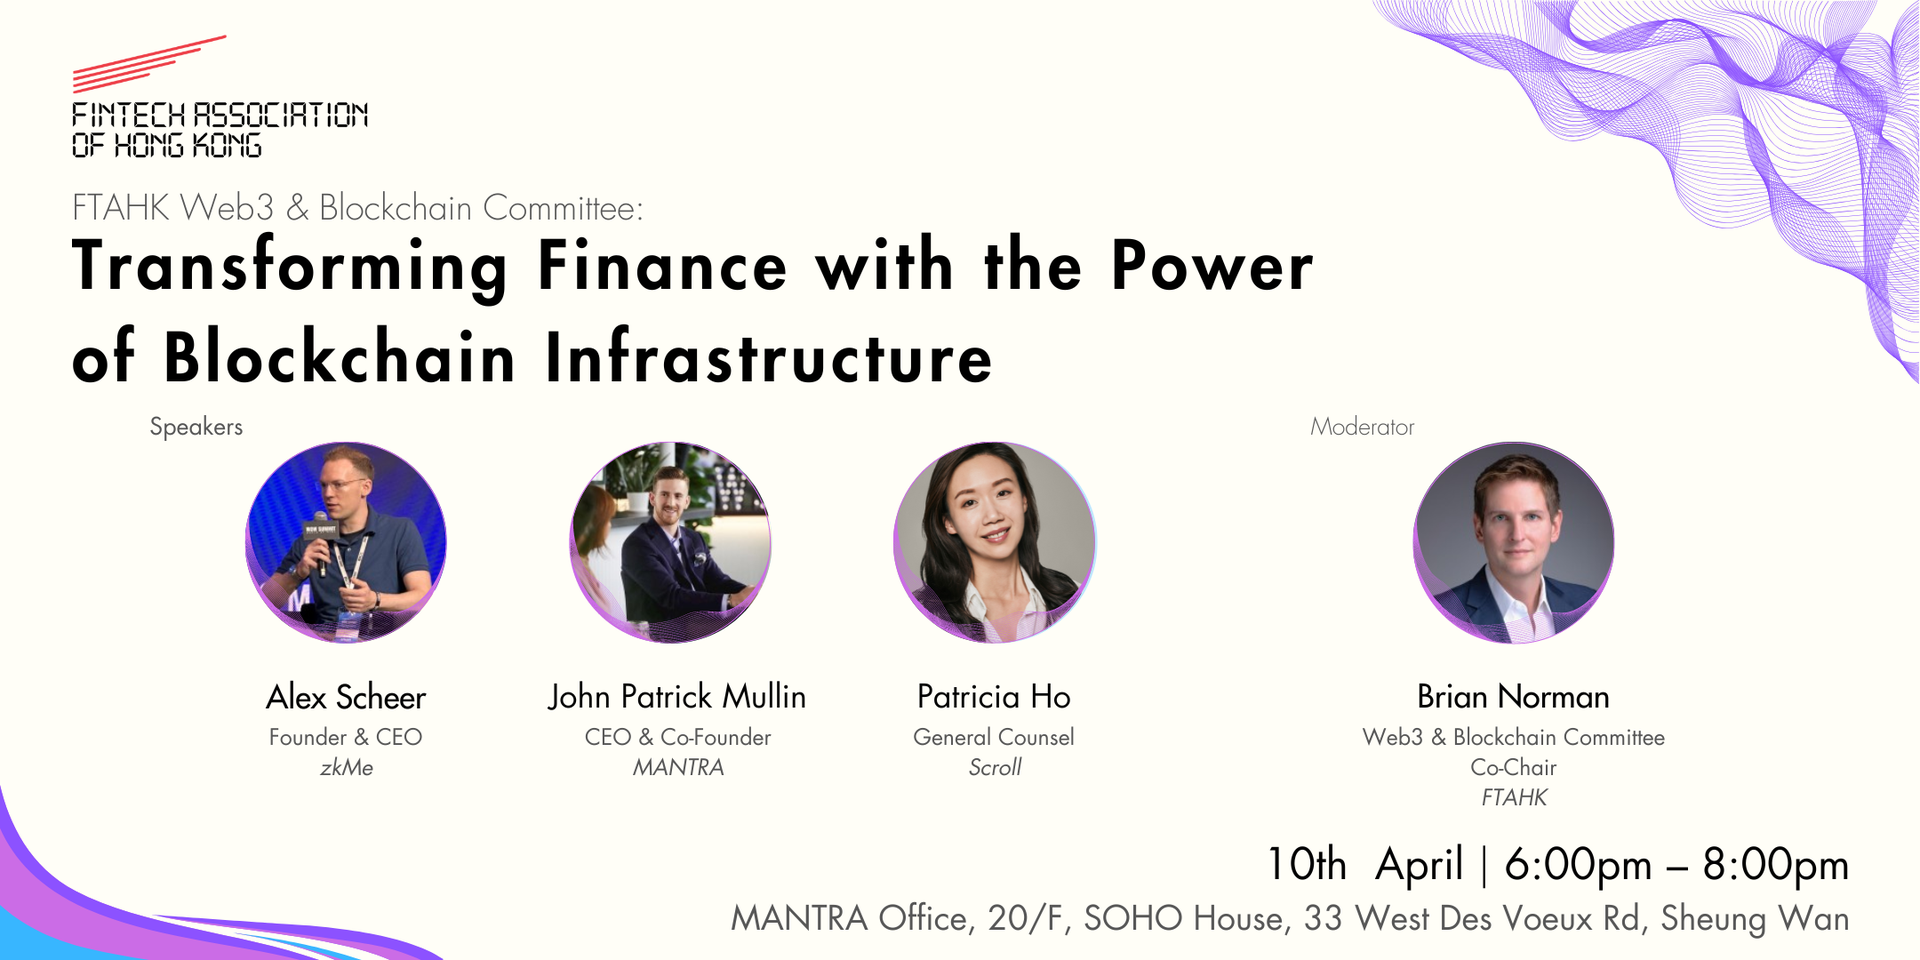 thumbnails FTAHK Web3 & Blockchain Committee: Transforming Finance with the Power of Blockchain Infrastructure